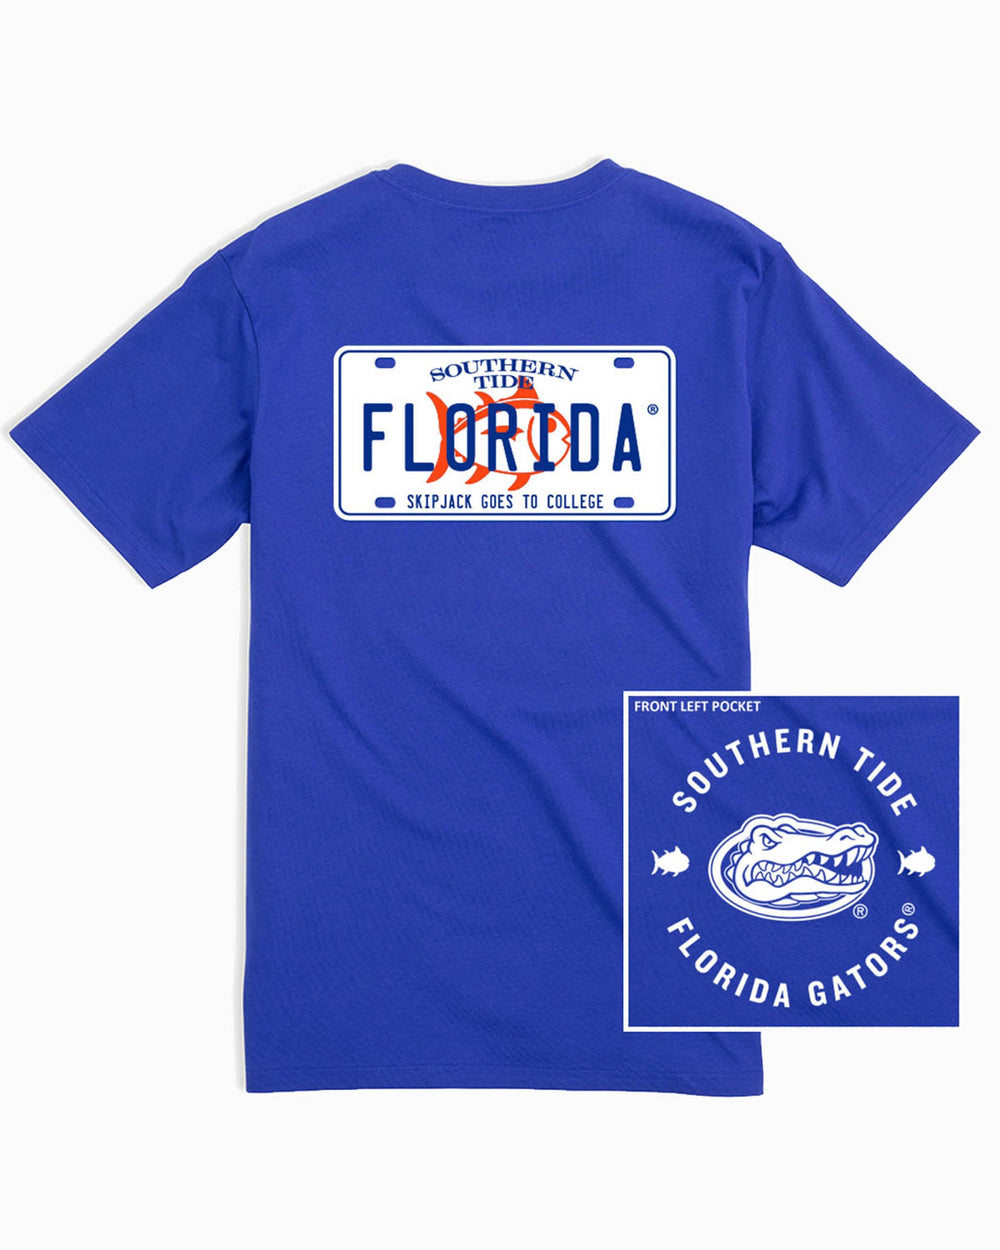 The front and back of the Florida Gators License Plate T-Shirt by Southern Tide - University Blue